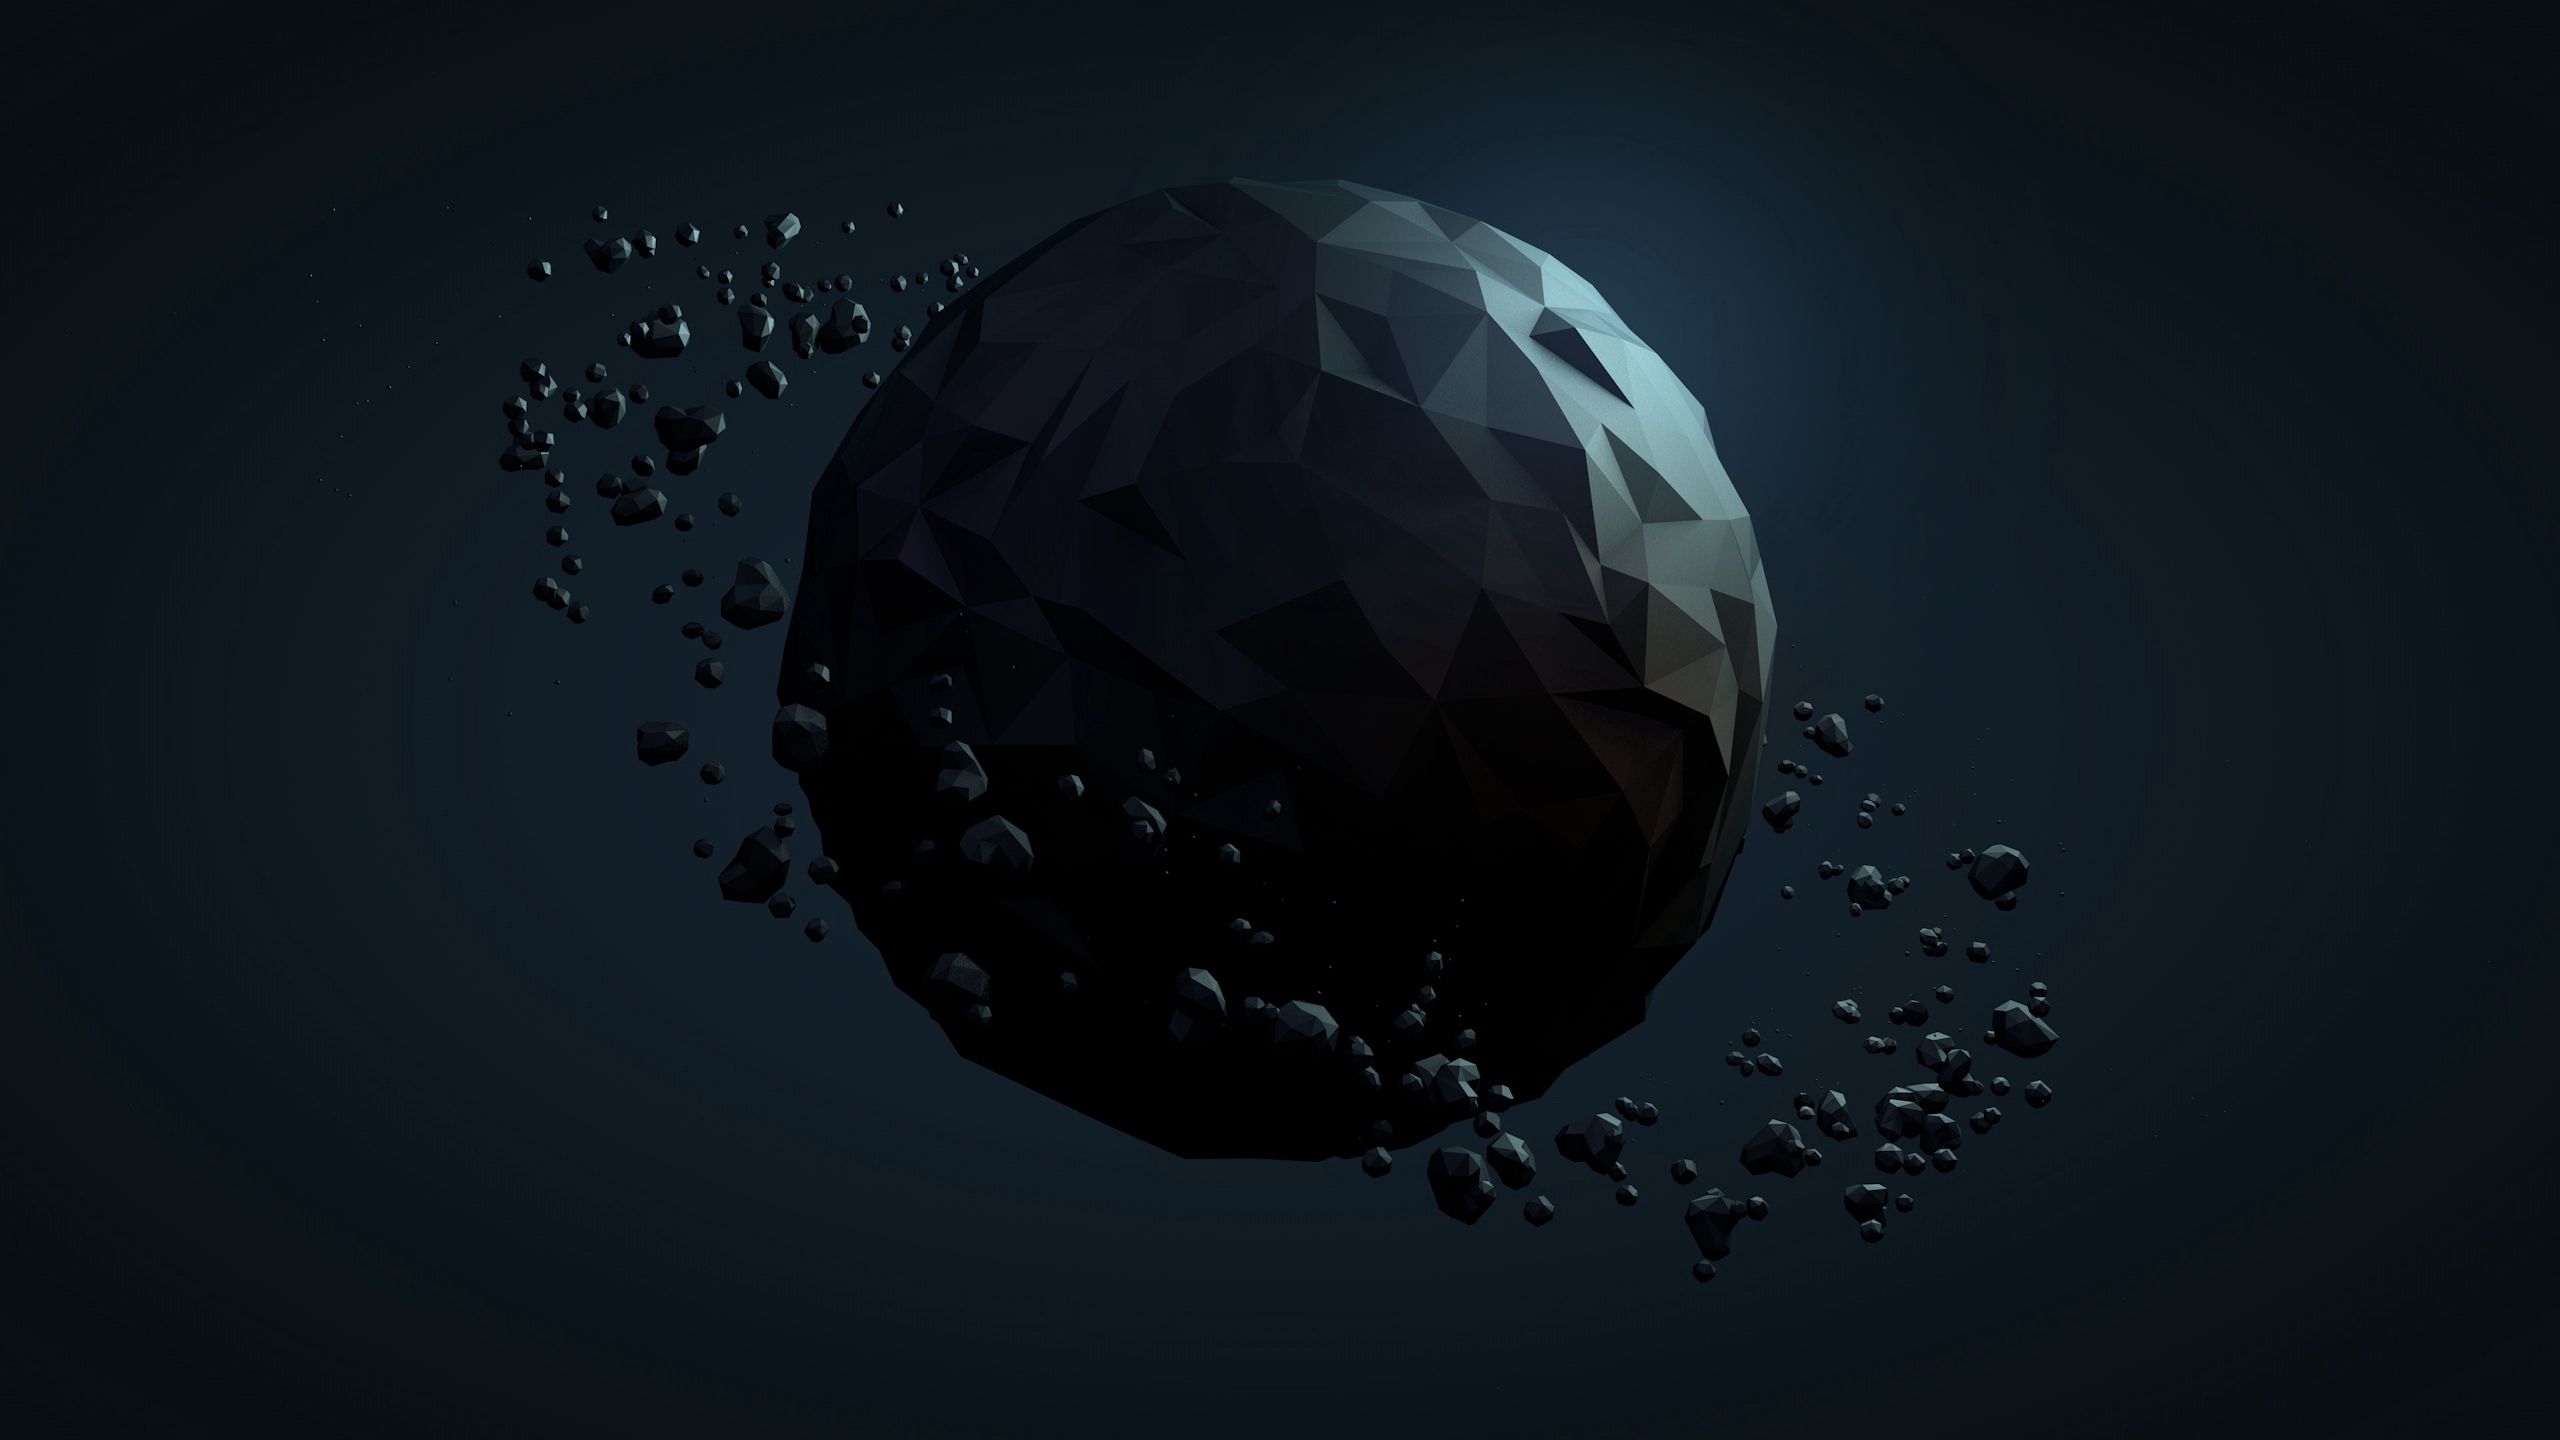 planet, dark, abstract, background, ball wallpapers for tablet